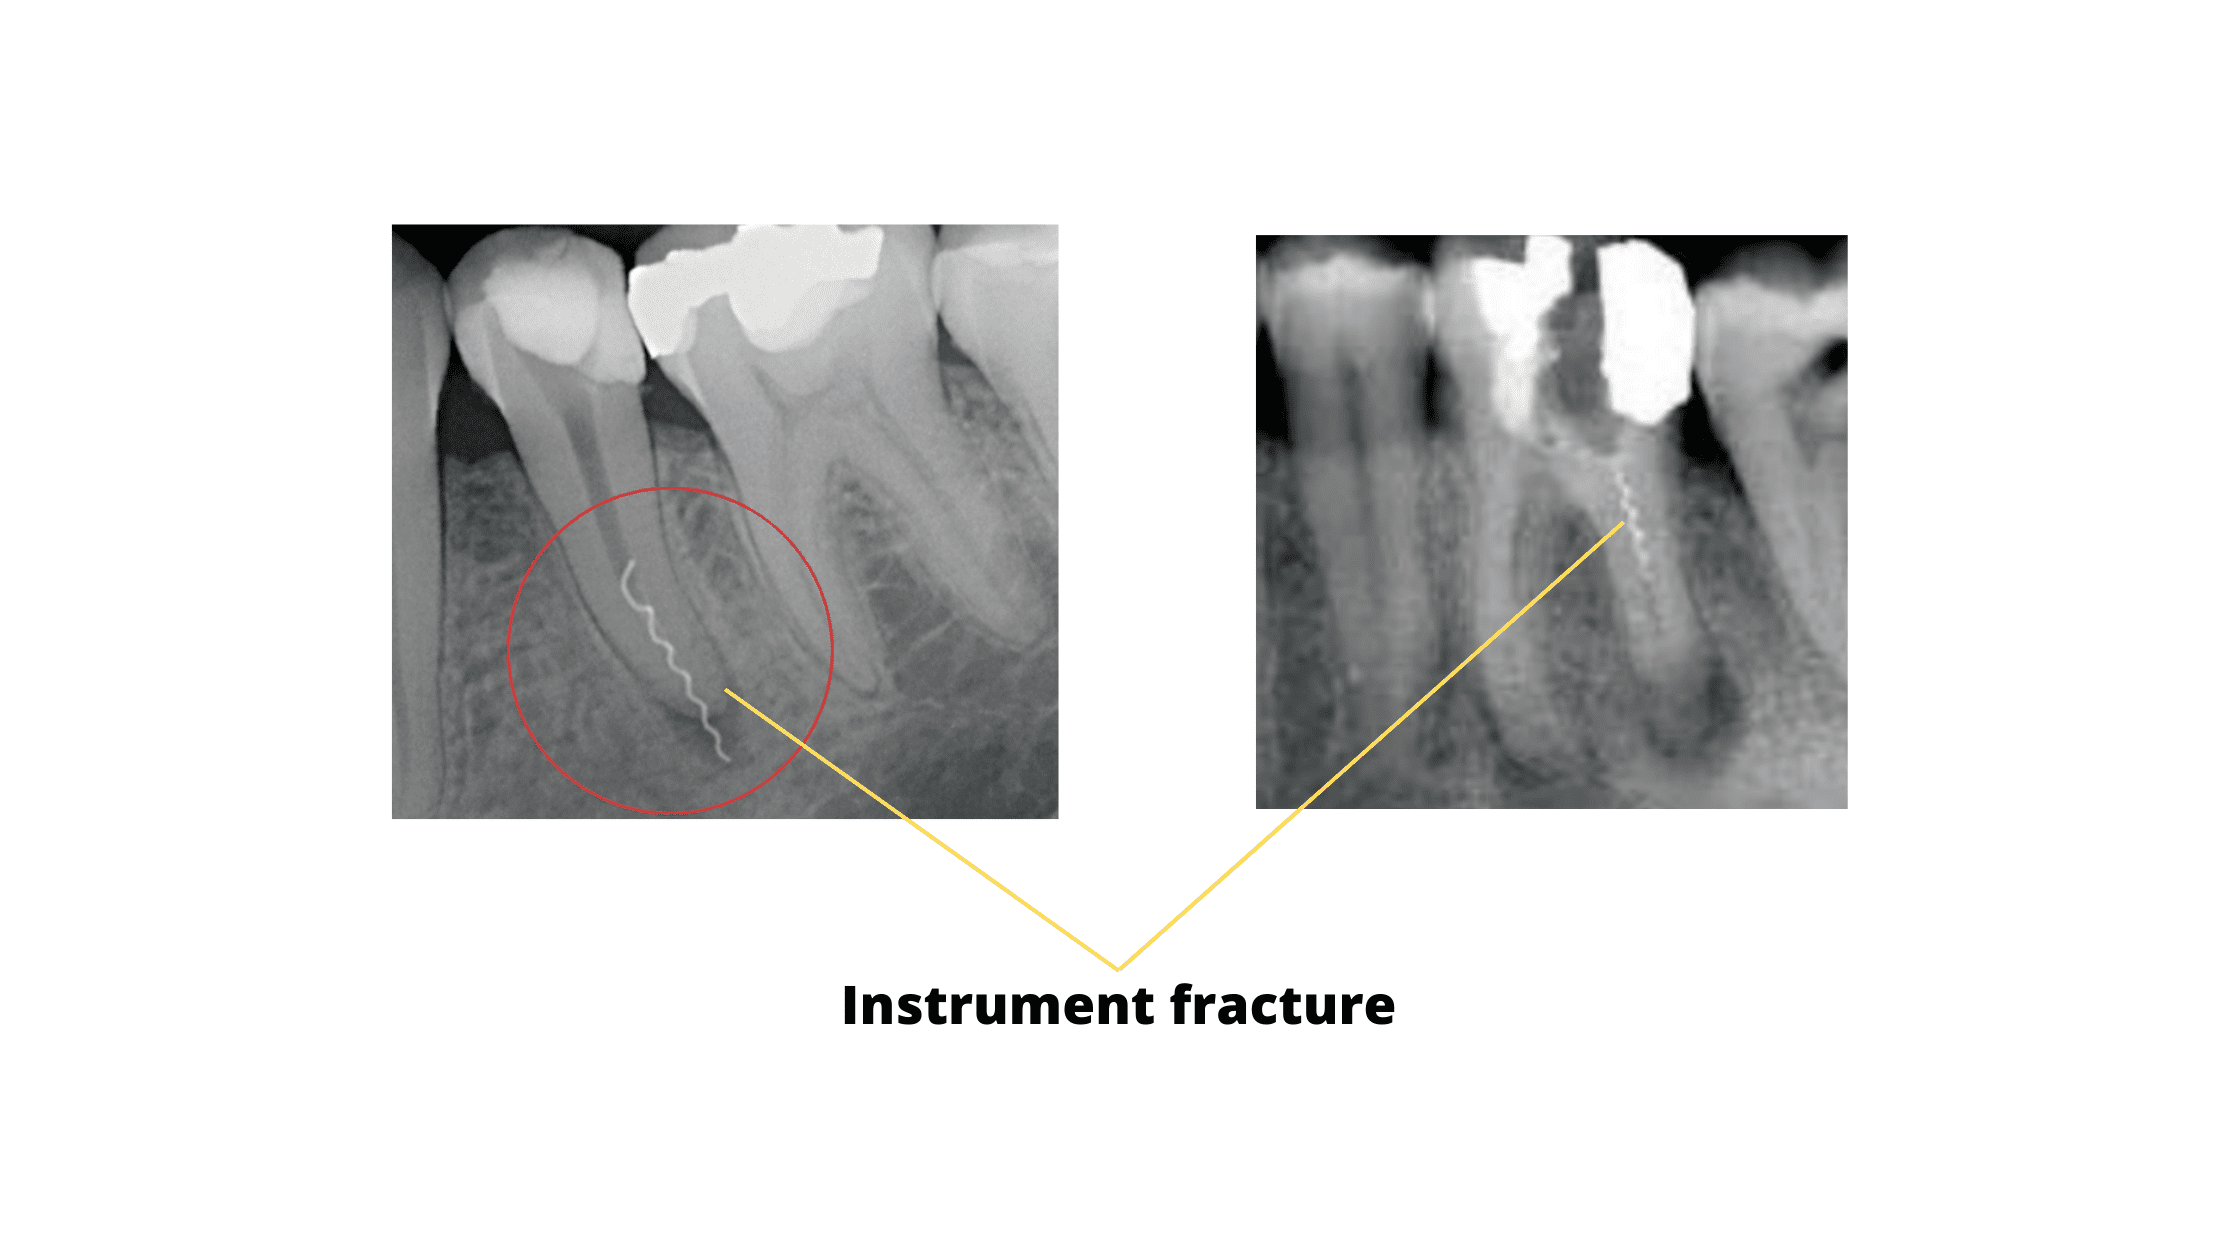 X-rays showing fractured instruments in root canals